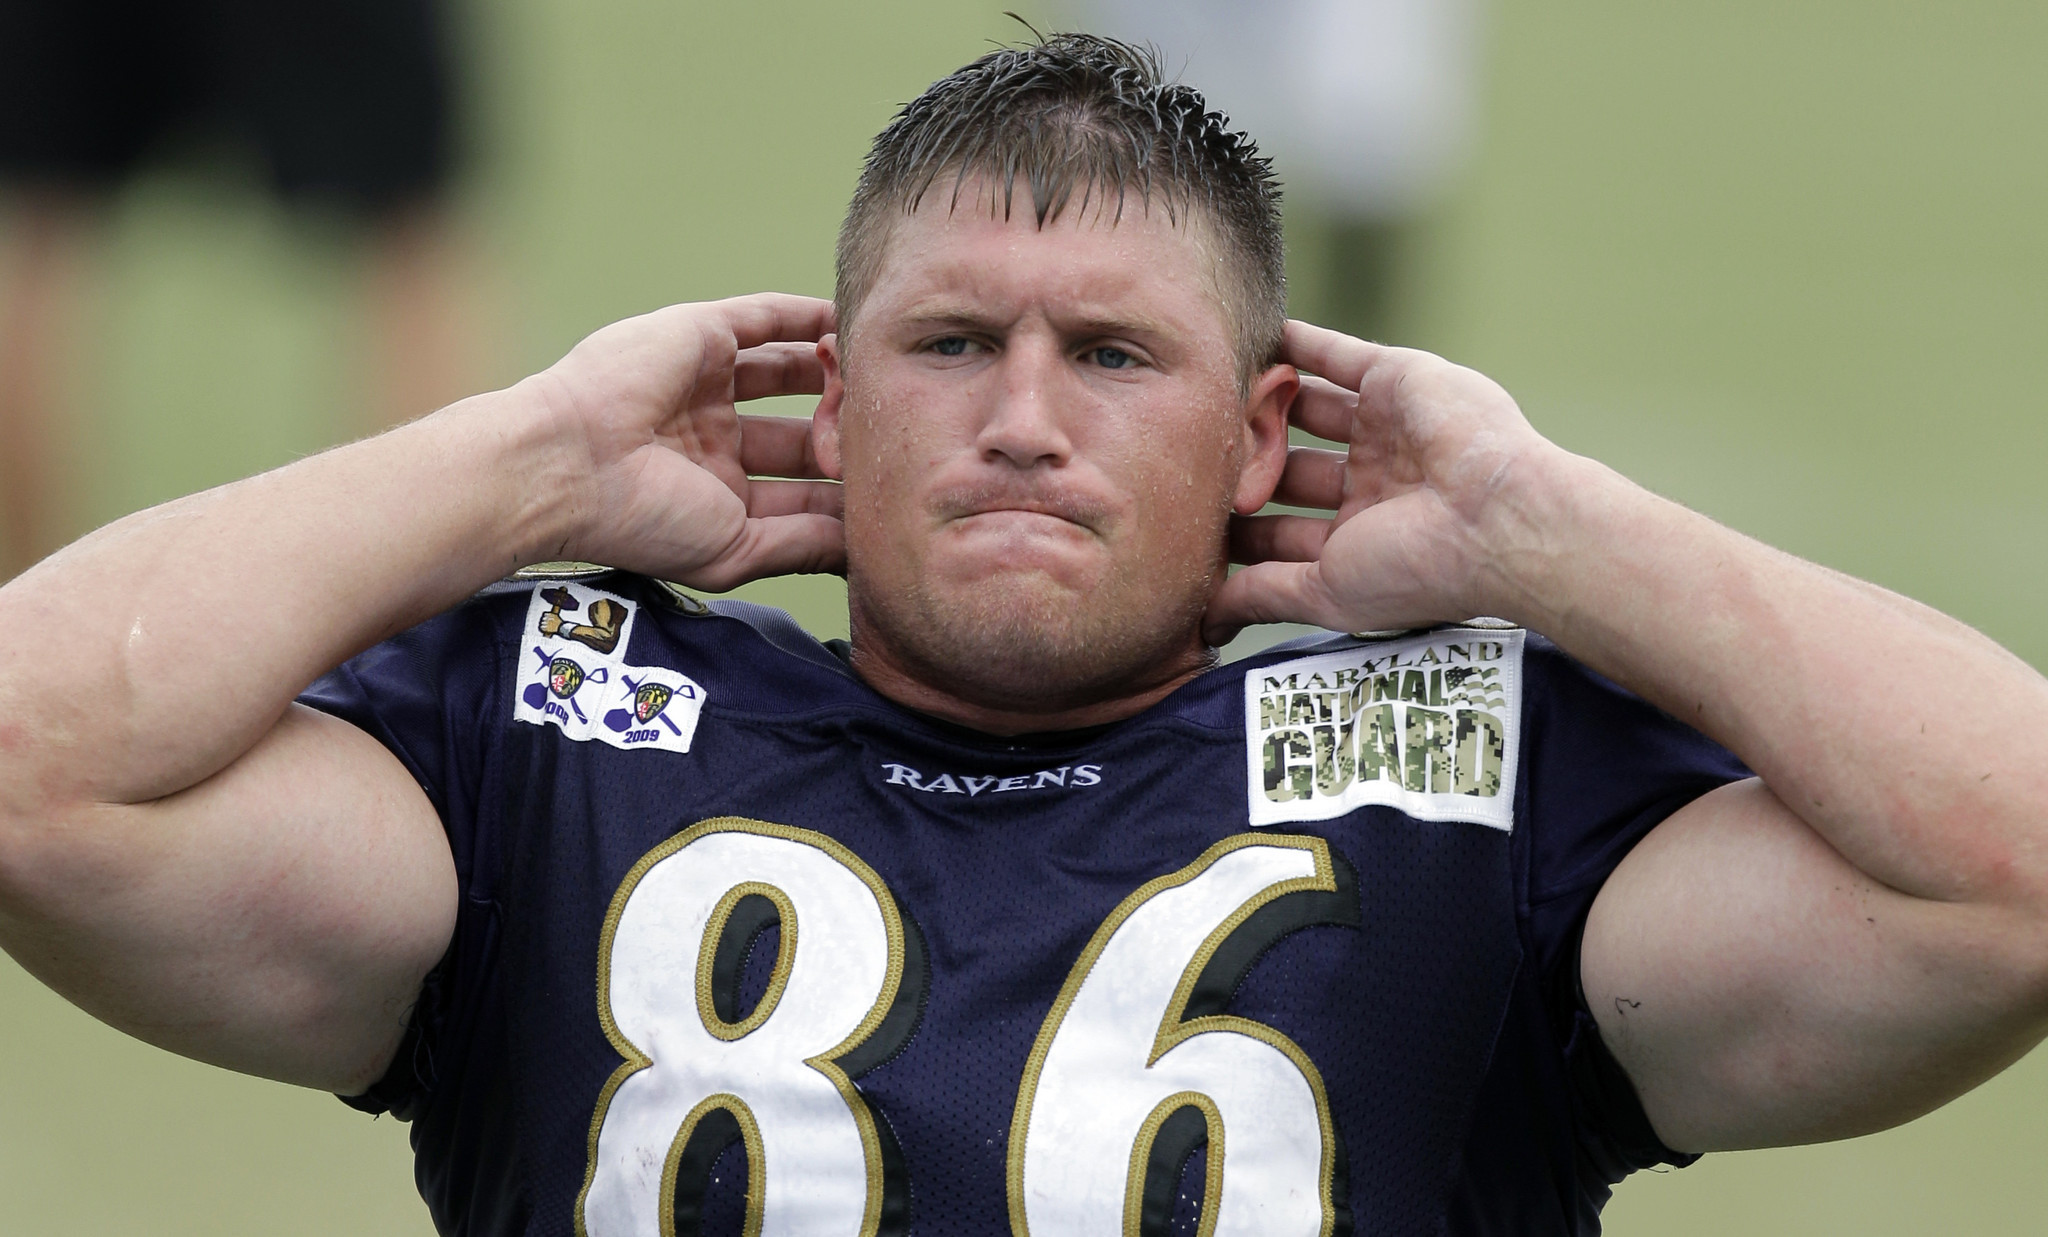 Anguish, sympathy for Todd Heap after ex-NFL player's kid killed - Baltimore Sun2048 x 1237